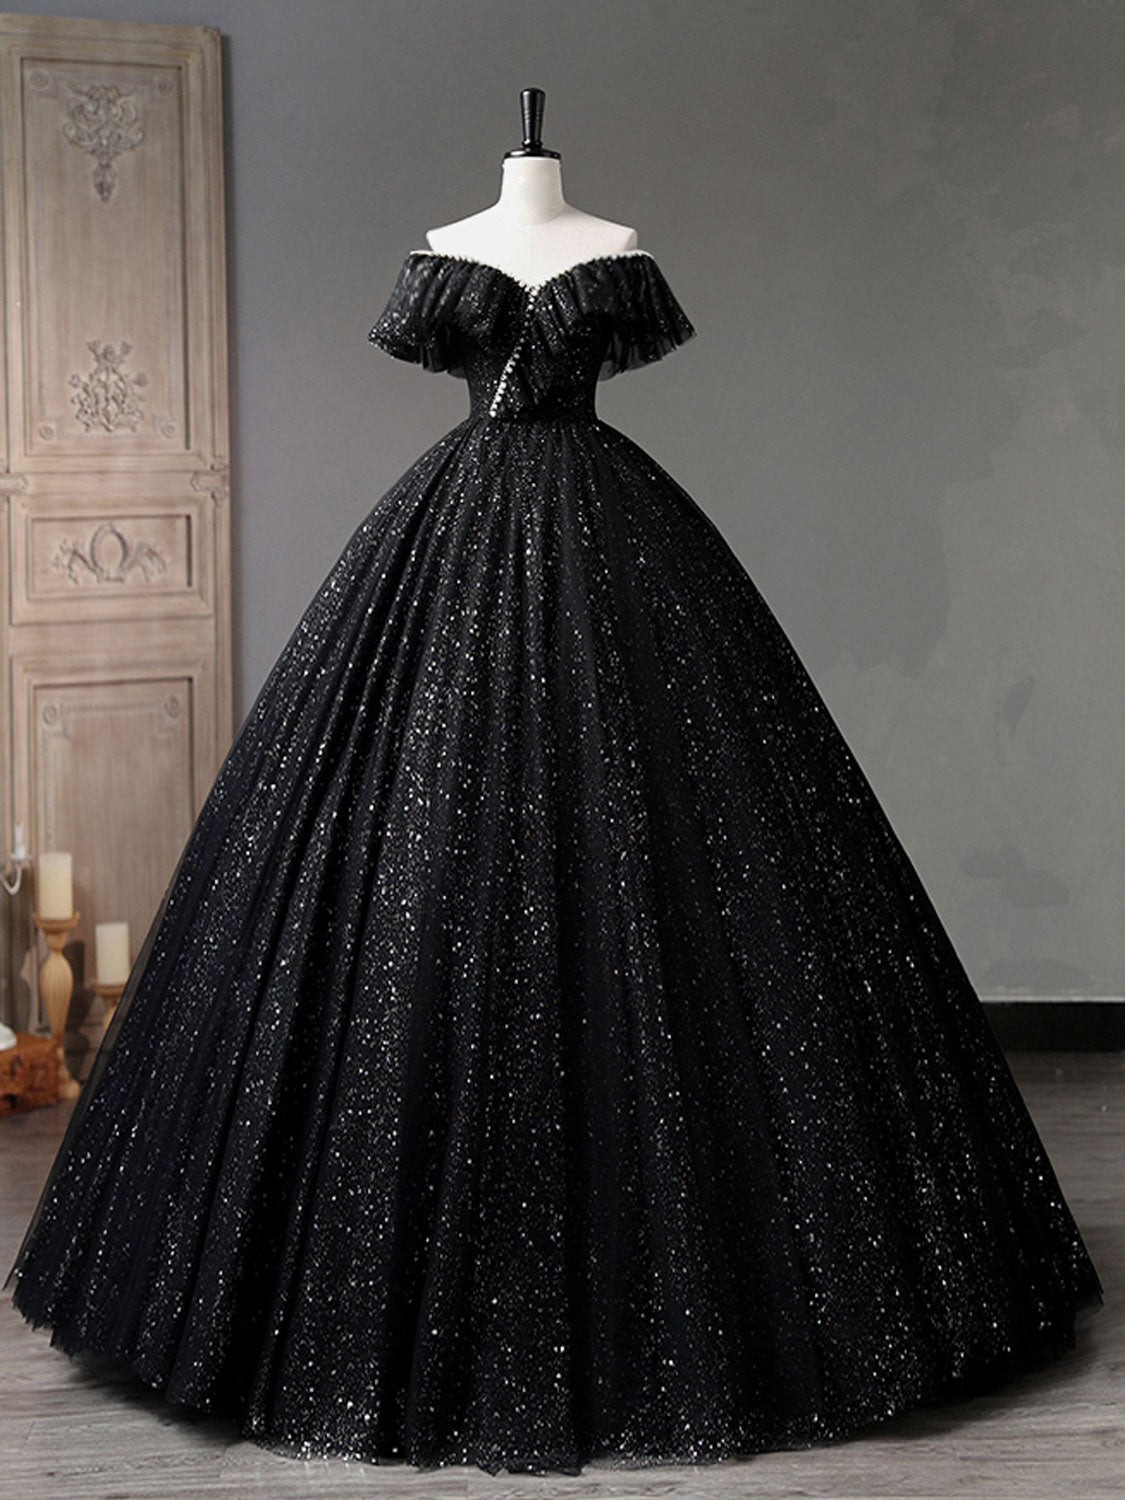 Browse Our Hot Collection of Homecoming Dress, Shop Modest Deep V-neck Long  Black Princess Prom Dresses Ball Gown at bohogown.com – Bohogown